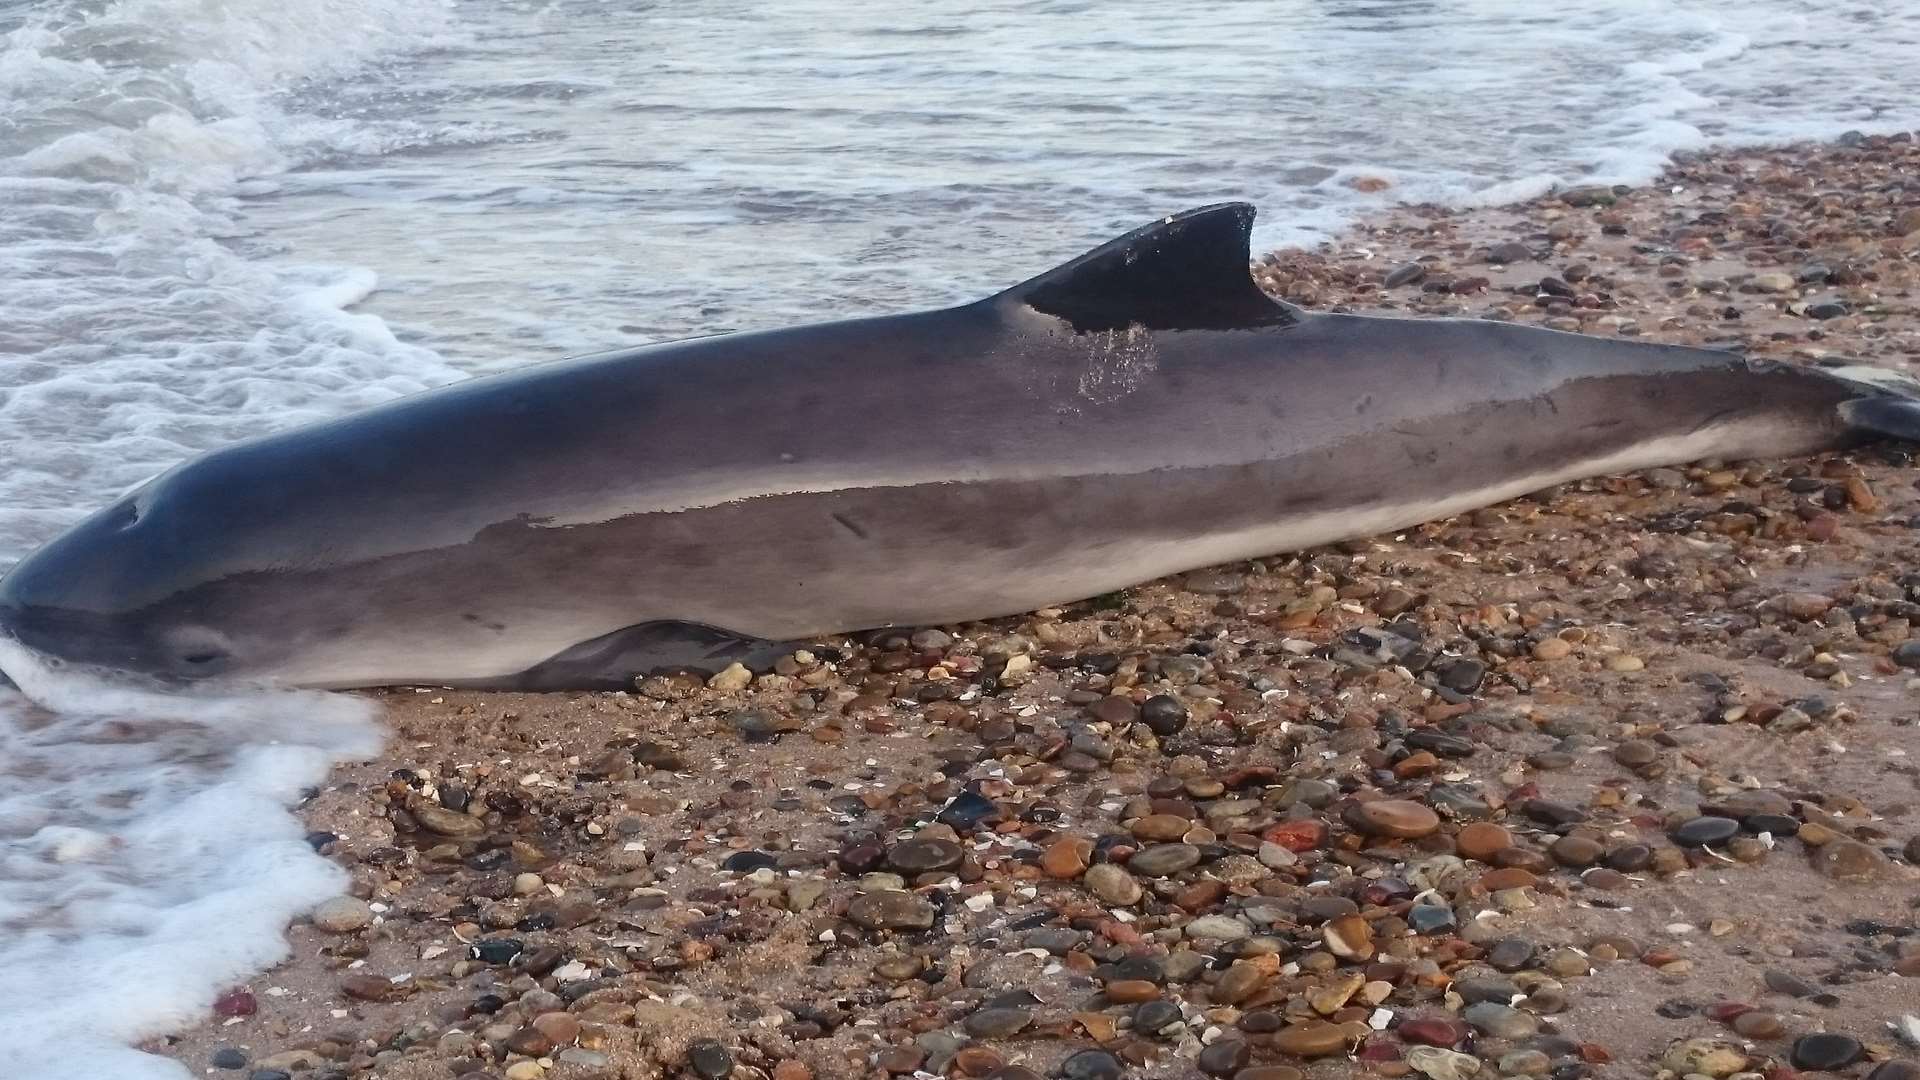 A porpoise washed up on Minster beach this afternoon